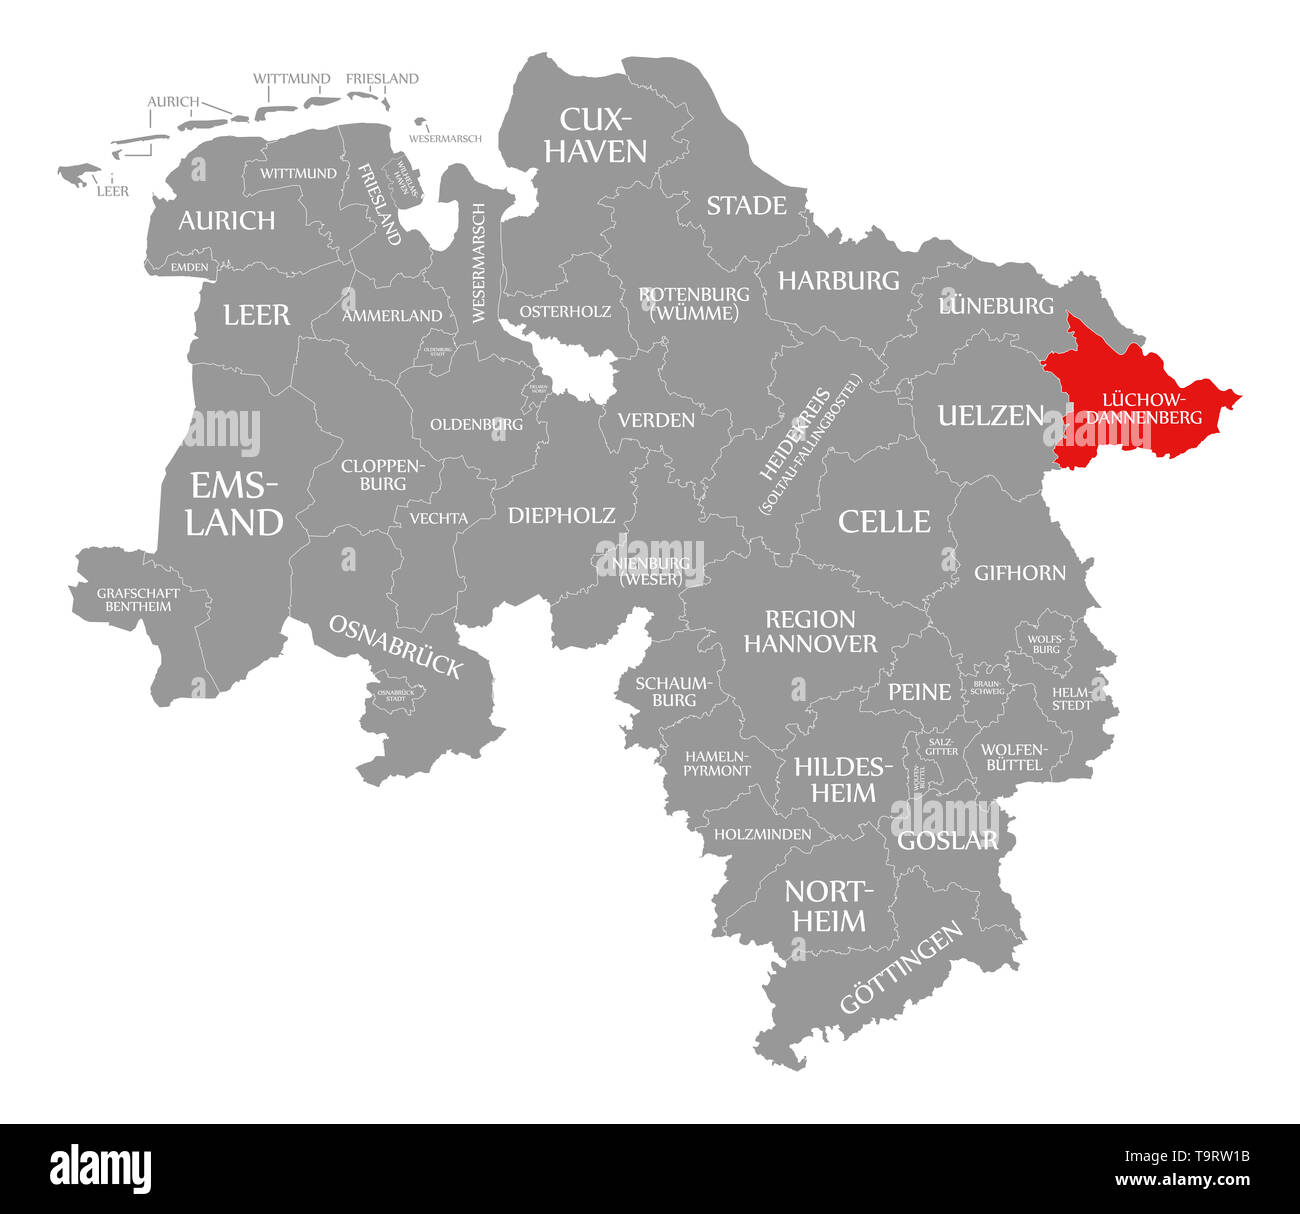 Luechow-Dannenberg county red highlighted in map of Lower Saxony Germany Stock Photo